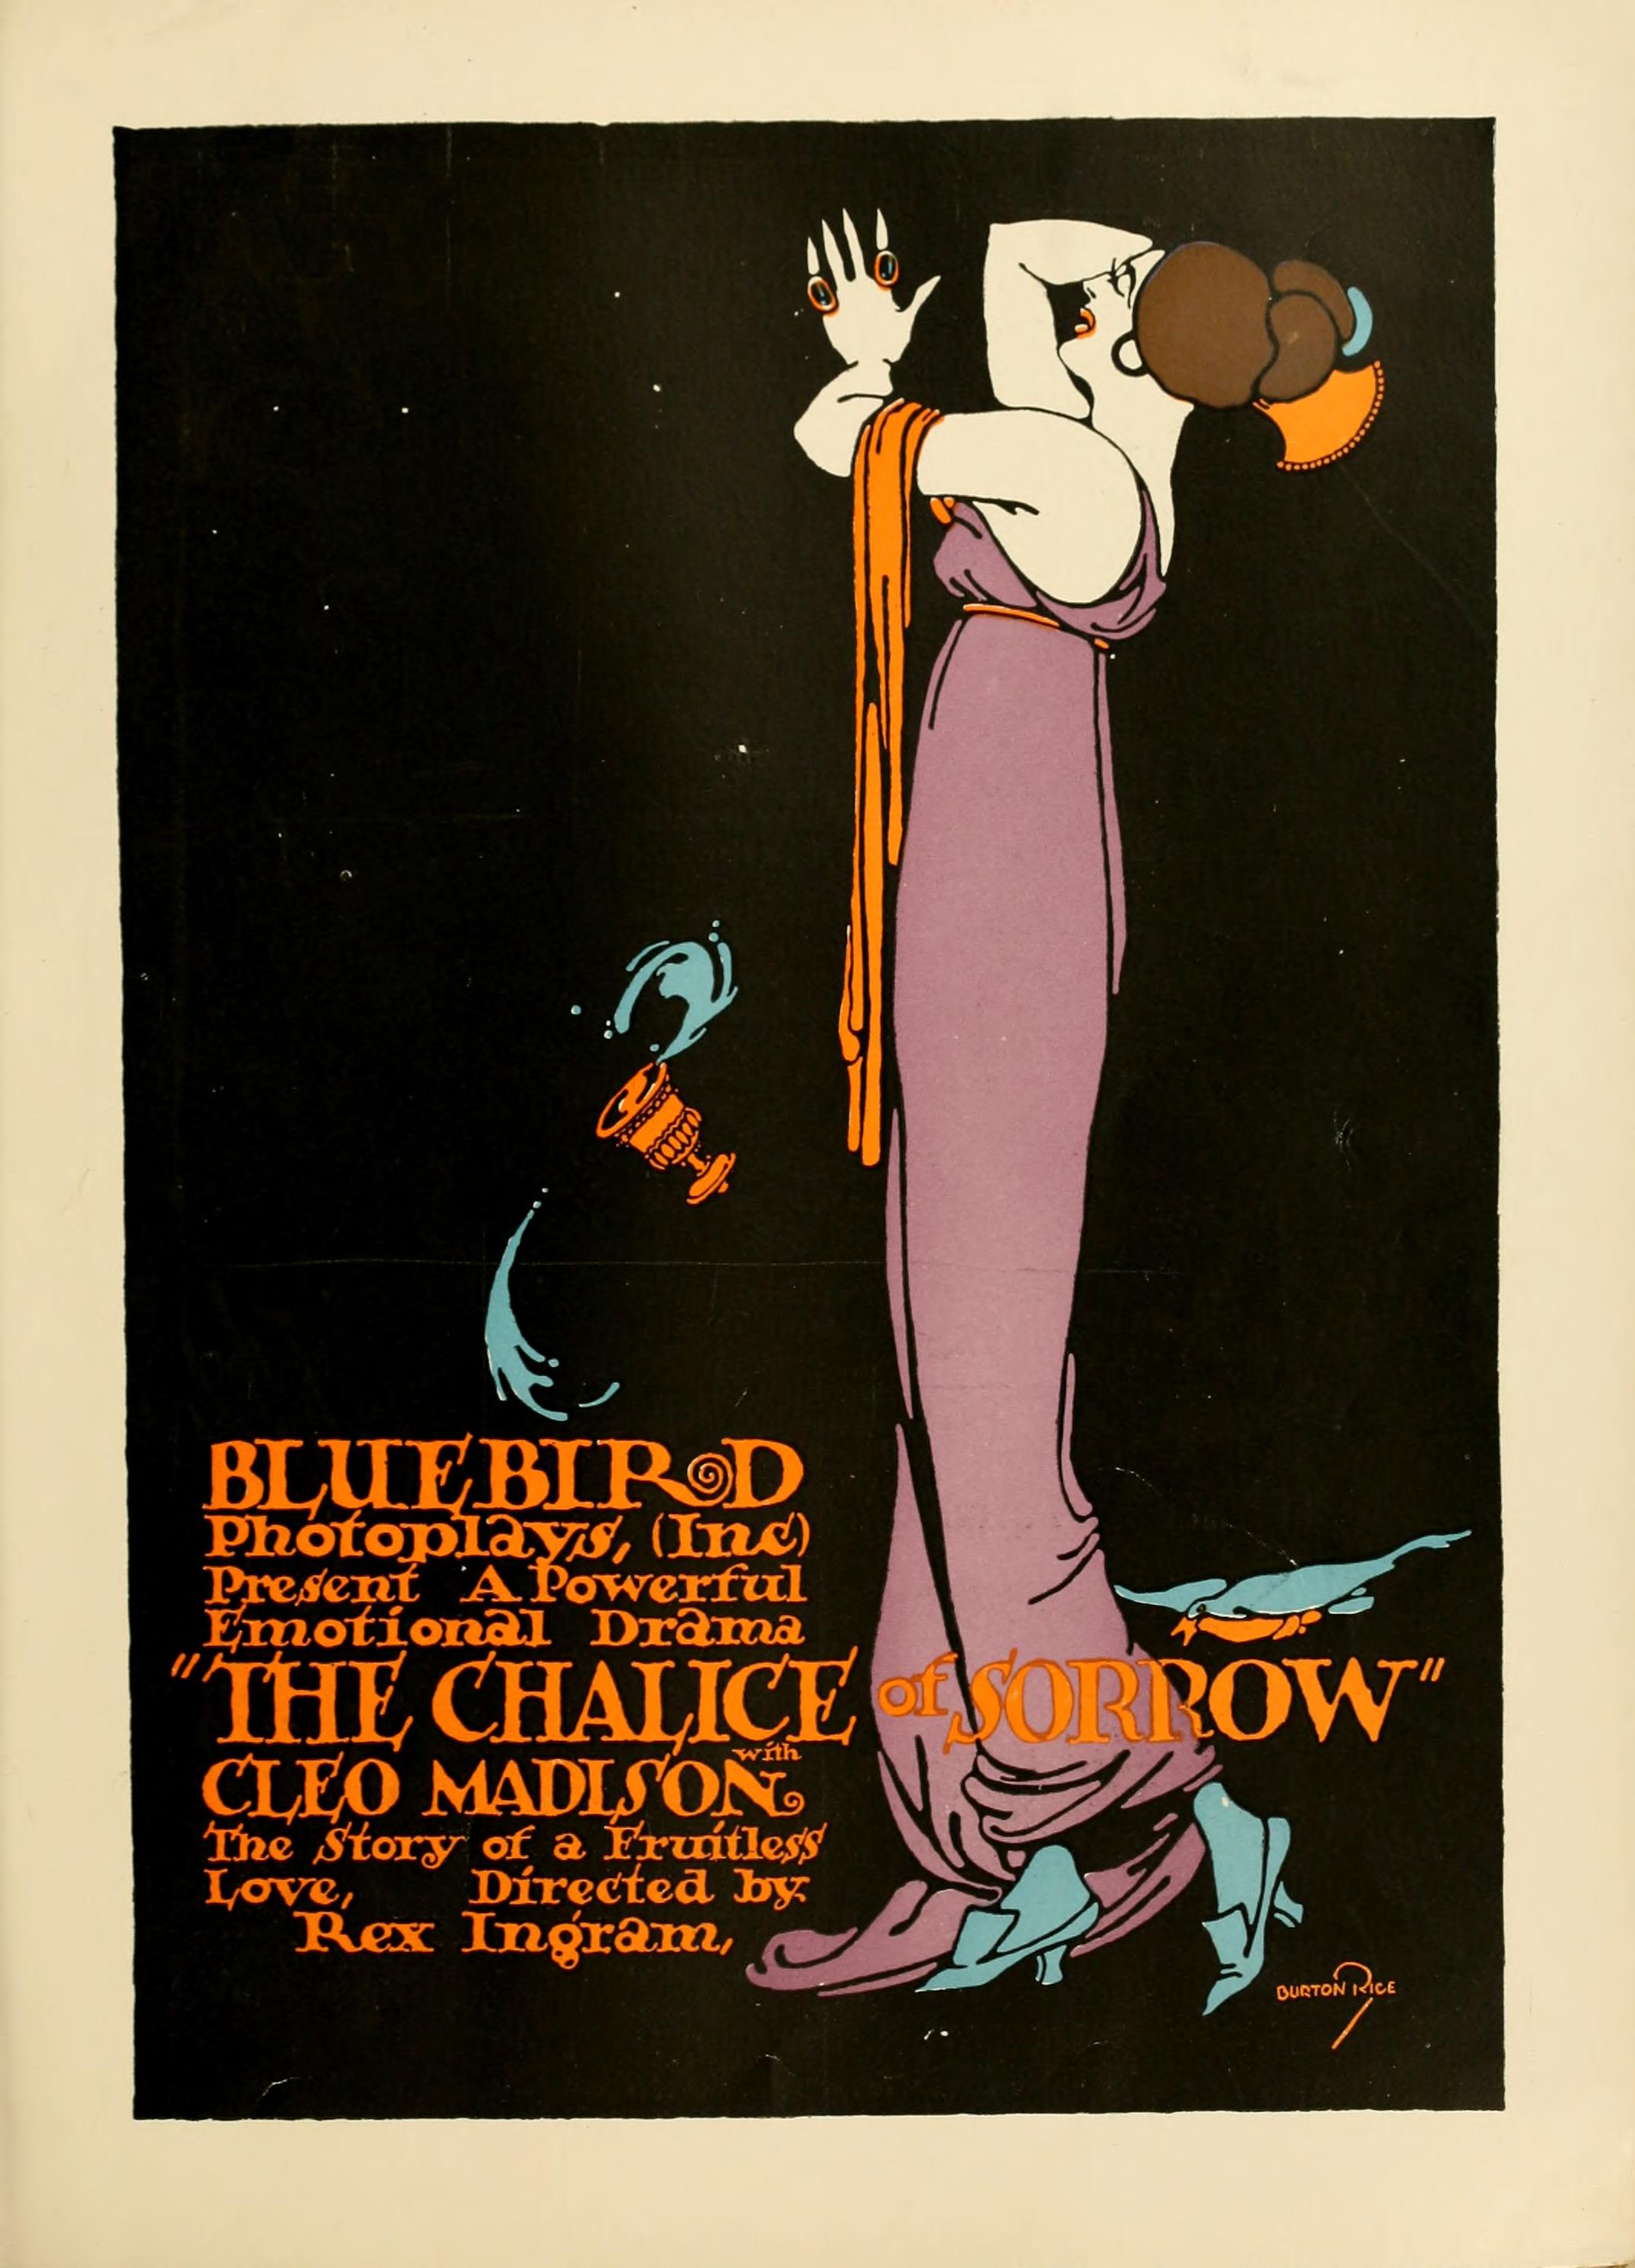 A powerful emotional drama "The Chalice of Sorrow" [aka, The Fatal Promise] with Cleo Madison. The Story of a Fruitless Love, directed by Rex Ingram. Moving Picture World, November 1916